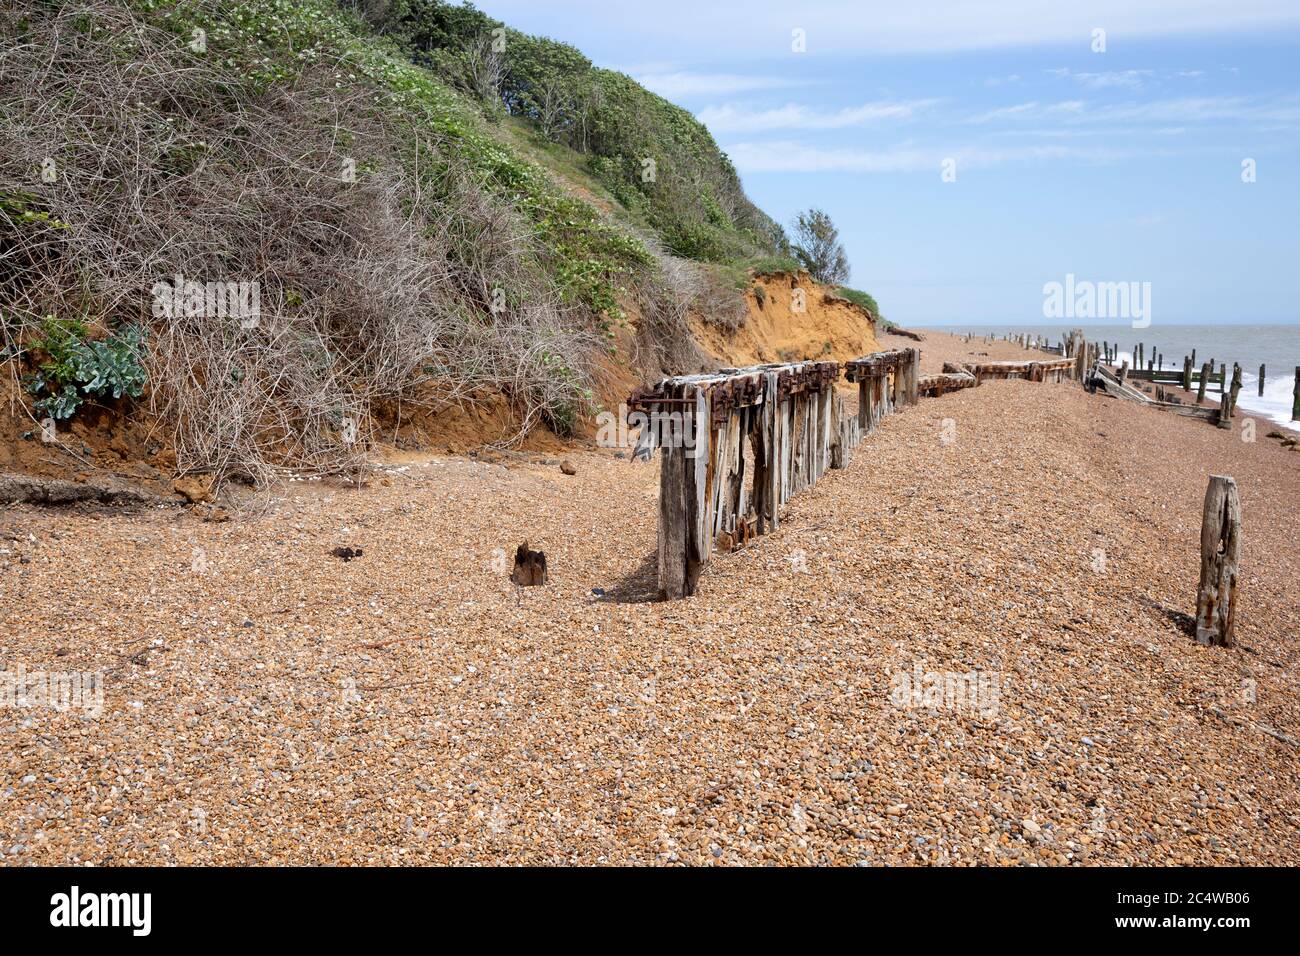 Remnants of old coastal defences and groins most 1940s anti-invasion military structures, Bawdsey, Suffolk, England, UK Stock Photo